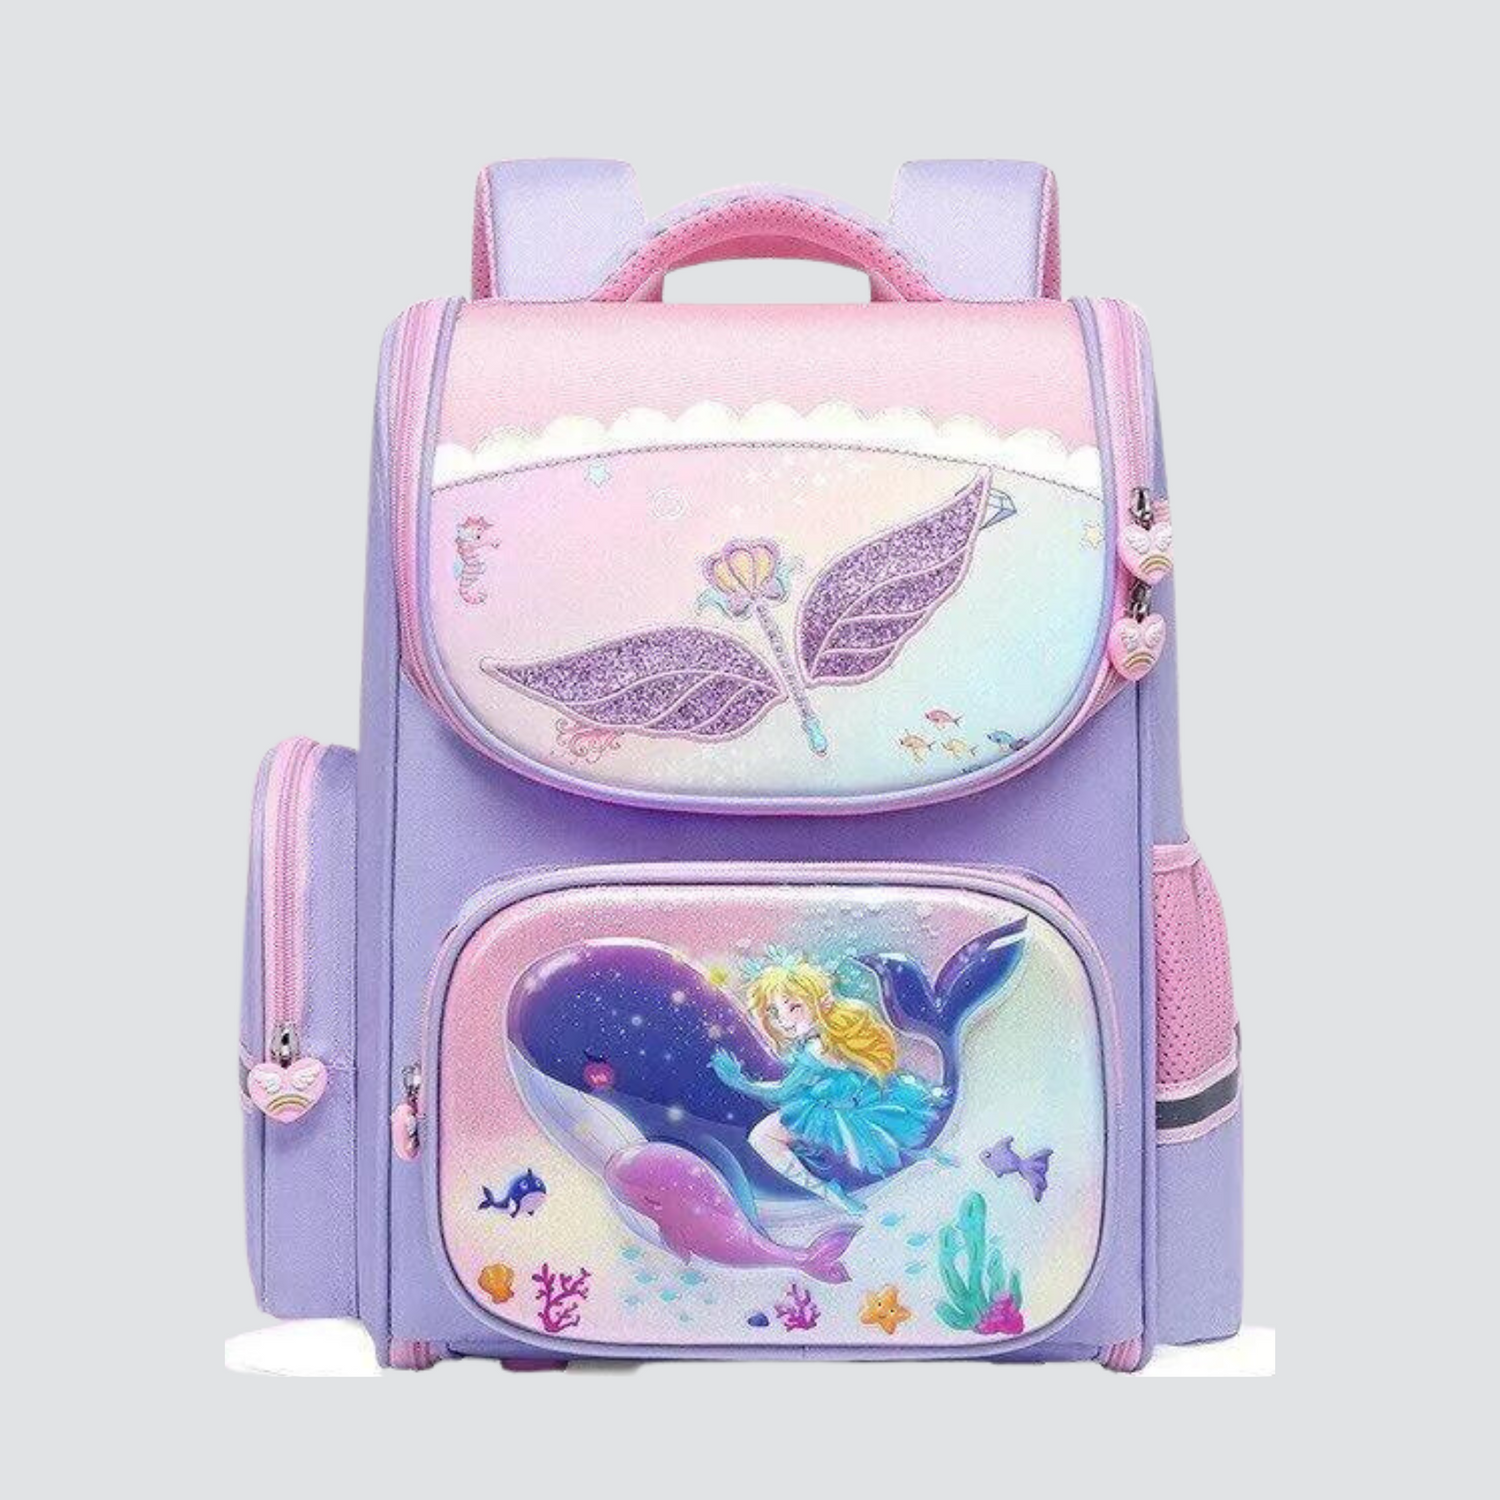 Purple Backpack with With Magical Wand and Princess Print 